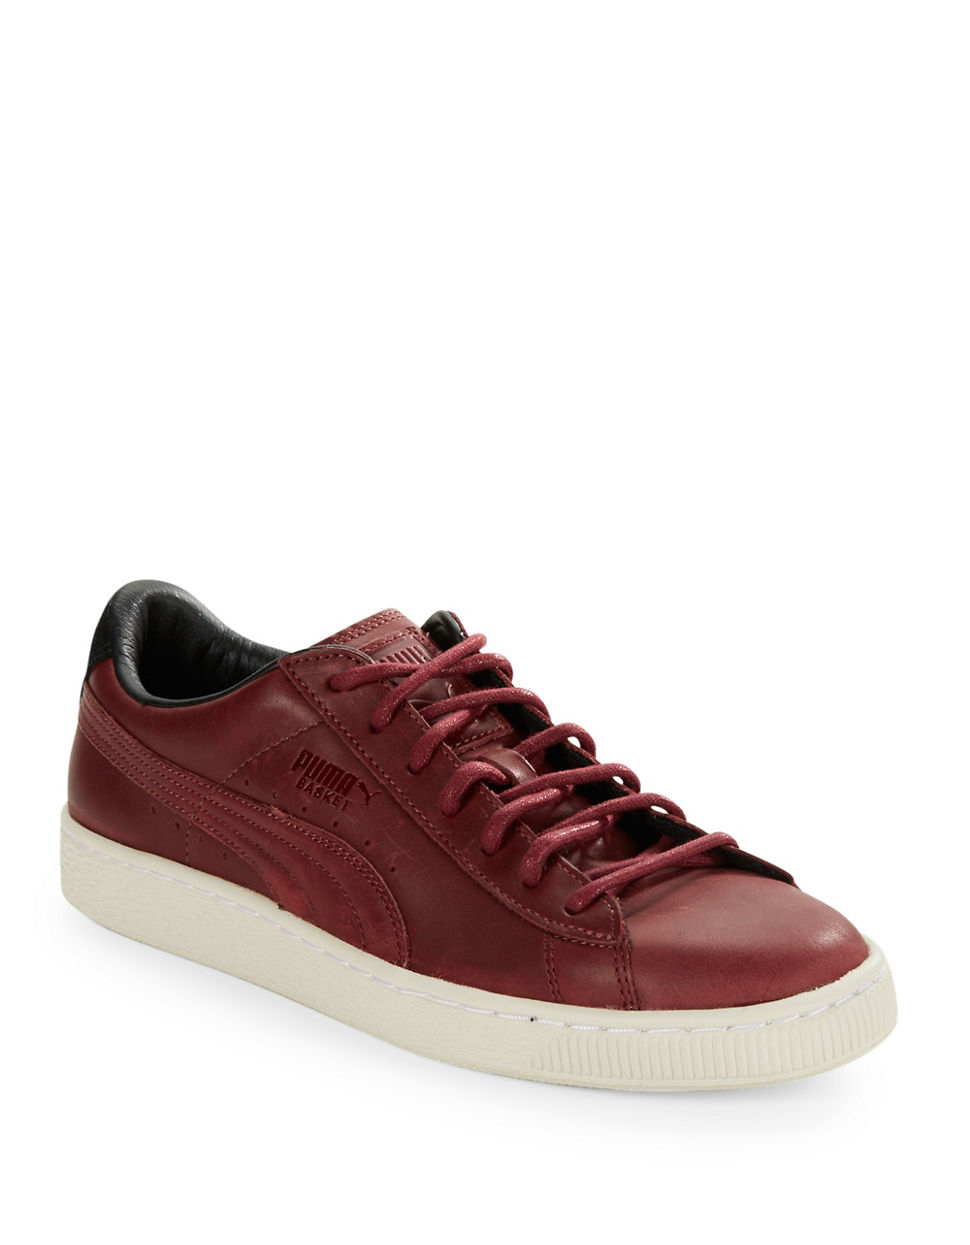 Lyst - Puma Basket Citi Series Leather Sneakers in Red for Men